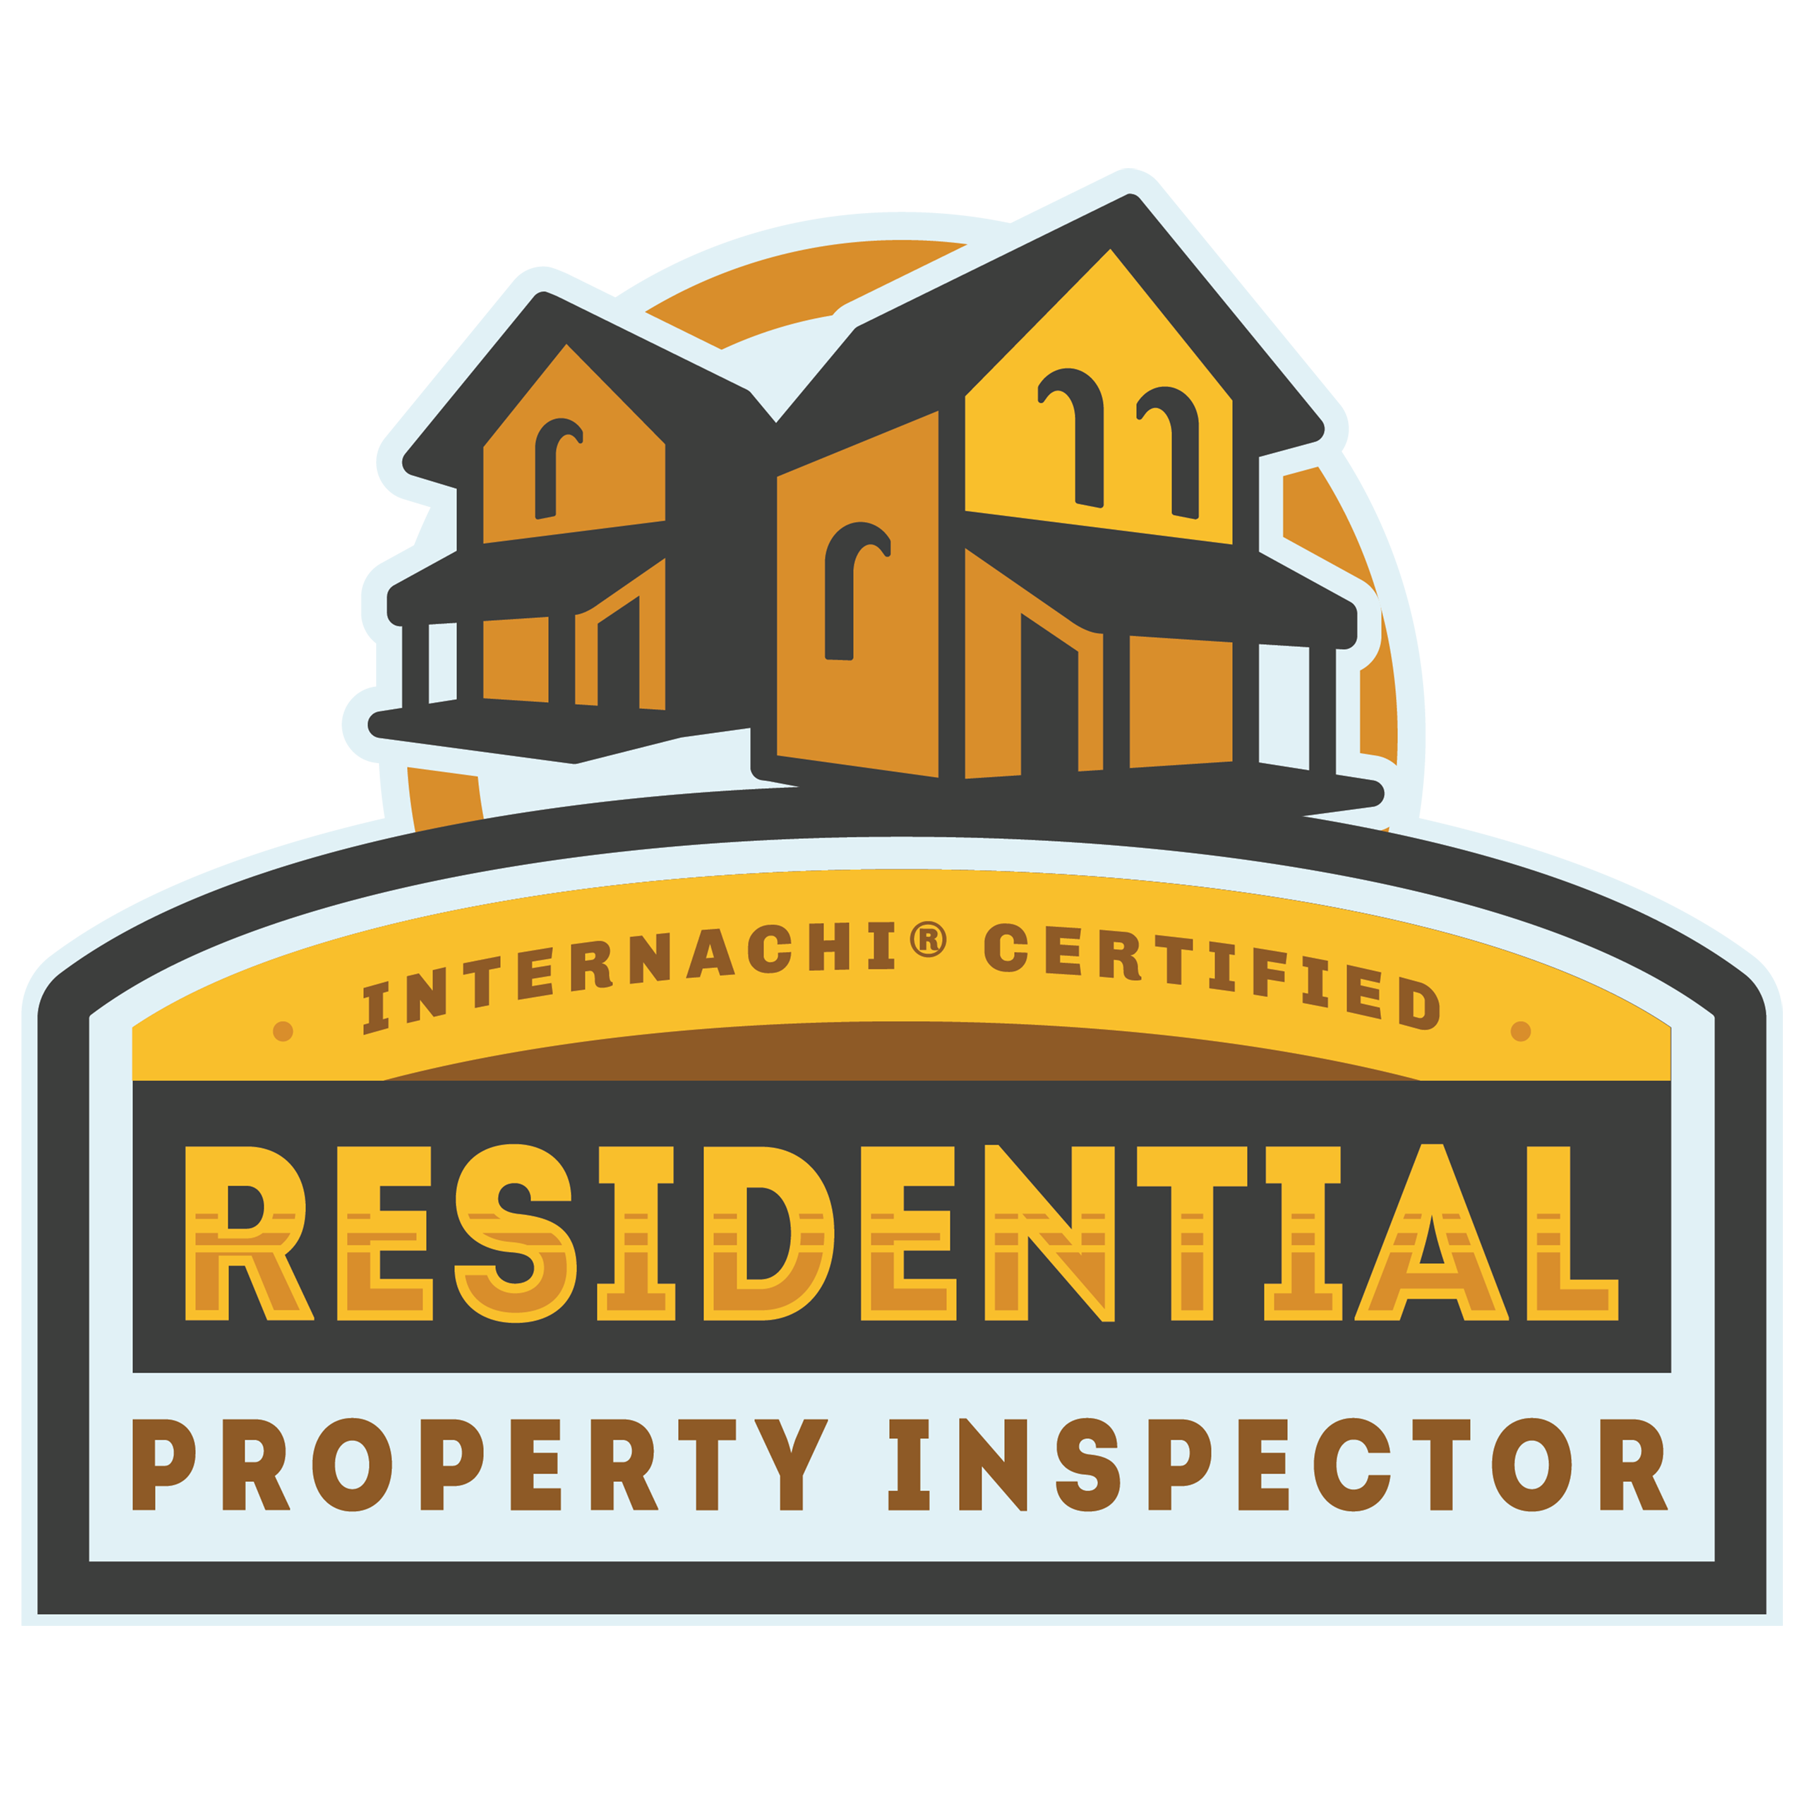 Residential Inspection, Buyers Inspection,home inspection florida, find a home inspector florida, what to expect during a home inspection florida, what are the most important things to look for during a home inspection florida, cost of home inspection florida, how to find a qualified home inspector florida, steps involved in getting a home inspection florida, tips for preparing for a home inspection florida, home inspector near me, home inspector in Weston Florida, home inspection florida, find a home inspector florida, what to expect during a home inspection florida, what are the most important things to look for during a home inspection florida, cost of home inspection florida, how to find a qualified home inspector florida, steps involved in getting a home inspection florida, tips for preparing for a home inspection florida, home inspector near me, home inspector in Weston Florida, home inspection florida, find a home inspector florida, what to expect during a home inspection florida, what are the most important things to look for during a home inspection florida, cost of home inspection florida, how to find a qualified home inspector florida, steps involved in getting a home inspection florida, tips for preparing for a home inspection florida, home inspector near me, home inspector in Weston Florida, Residential inspection Weston FL, Home inspection Weston FL, Pre-purchase inspection Weston FL, Pre-sale inspection Weston FL, Home buying inspection Weston FL, Home selling inspection Weston FL, Home inspection cost Weston FL, Home inspection near me Weston FL, Home inspection benefits Weston FL, Home inspection requirements Weston FL, Home inspection discounts Weston FL, Home inspection form Weston FL, Home inspection companies Weston FL, Home inspection reviews Weston FL, Home inspection before buying a home Weston FL, Home inspection before selling a home Weston FL, Home inspection for a condo Weston FL, Home inspection for a townhouse Weston FL, Home inspection for a single-family home Weston FL, Home inspection for a flipped house Weston FL, Home inspection for an investment property Weston FL, Residential inspection, Home inspection, Pre-purchase inspection, Pre-sale inspection, Home buying inspection, Home selling inspection, Home inspection cost, Home inspection near me, Residential inspection Weston FL, Home inspection Weston FL, Pre-purchase inspection Weston FL, Pre-sale inspection Weston FL, Home buying inspection Weston FL, Home selling inspection Weston FL, Home inspection cost Weston FL, Home inspection near me Weston FL, Home inspection benefits Weston FL, Home inspection requirements Weston FL, Home inspection discounts Weston FL, Home inspection form Weston FL, Home inspection companies Weston FL, Home inspection reviews Weston FL, Home inspection before buying a home Weston FL, Home inspection before selling a home Weston FL, Home inspection for a condo Weston FL, Home inspection for a townhouse Weston FL, Home inspection for a single-family home Weston FL, Home inspection for a flipped house Weston FL, Home inspection for an investment property Weston FL, Residential inspection, Home inspection, Pre-purchase inspection, Pre-sale inspection, Home buying inspection, Home selling inspection, Home inspection cost, Home inspection near me, Home inspection benefits, Home inspection requirements, Home inspection discounts, Home inspection form Home inspection companies, Home inspection reviews, Home inspection before buying a home, Home inspection before selling a home, Home inspection for a condo, Home inspection for a townhouse, Home inspection for a single-family home, Home inspection for a flipped house, Home inspection for an investment property, Residential inspection Weston FL, Home inspection Weston FL, Pre-purchase inspection Weston FL, Pre-sale inspection Weston FL, Home buying inspection Weston FL, Home selling inspection Weston FL, Home inspection cost Weston FL, Home inspection near me Weston FL, Home inspection benefits Weston FL, Home inspection requirements Weston FL, Home inspection discounts Weston FL, Home inspection form Weston FL, Home inspection companies Weston FL, Home inspection reviews Weston FL, Home inspection before buying a home Weston FL, Home inspection before selling a home Weston FL, Home inspection for a condo Weston FL, Home inspection for a townhouse Weston FL, Home inspection for a single-family home Weston FL, Home inspection for a flipped house Weston FL, Home inspection for an investment property Weston FL, Residential inspection, Home inspection, Pre-purchase inspection, Pre-sale inspection, Home buying inspection, Home selling inspection, Home inspection cost, Home inspection near me, Home inspection benefits, Home inspection requirements, Home inspection discounts, Home inspection form Home inspection companies, Home inspection reviews, Home inspection before buying a home, Home inspection before selling a home, Home inspection for a condo, Home inspection for a townhouse, Home inspection for a single-family home, Home inspection for a flipped house, Home inspection for an investment property, wind mitigation inspection Weston FL, wind mitigation inspection cost Weston FL, wind mitigation inspection near me Weston FL, wind mitigation inspection benefits Weston FL, wind mitigation inspection requirements Weston FL, wind mitigation inspection discounts Weston FL, wind mitigation inspection form Weston FL, wind mitigation inspection companies Weston FL, wind mitigation inspection reviews Weston FL